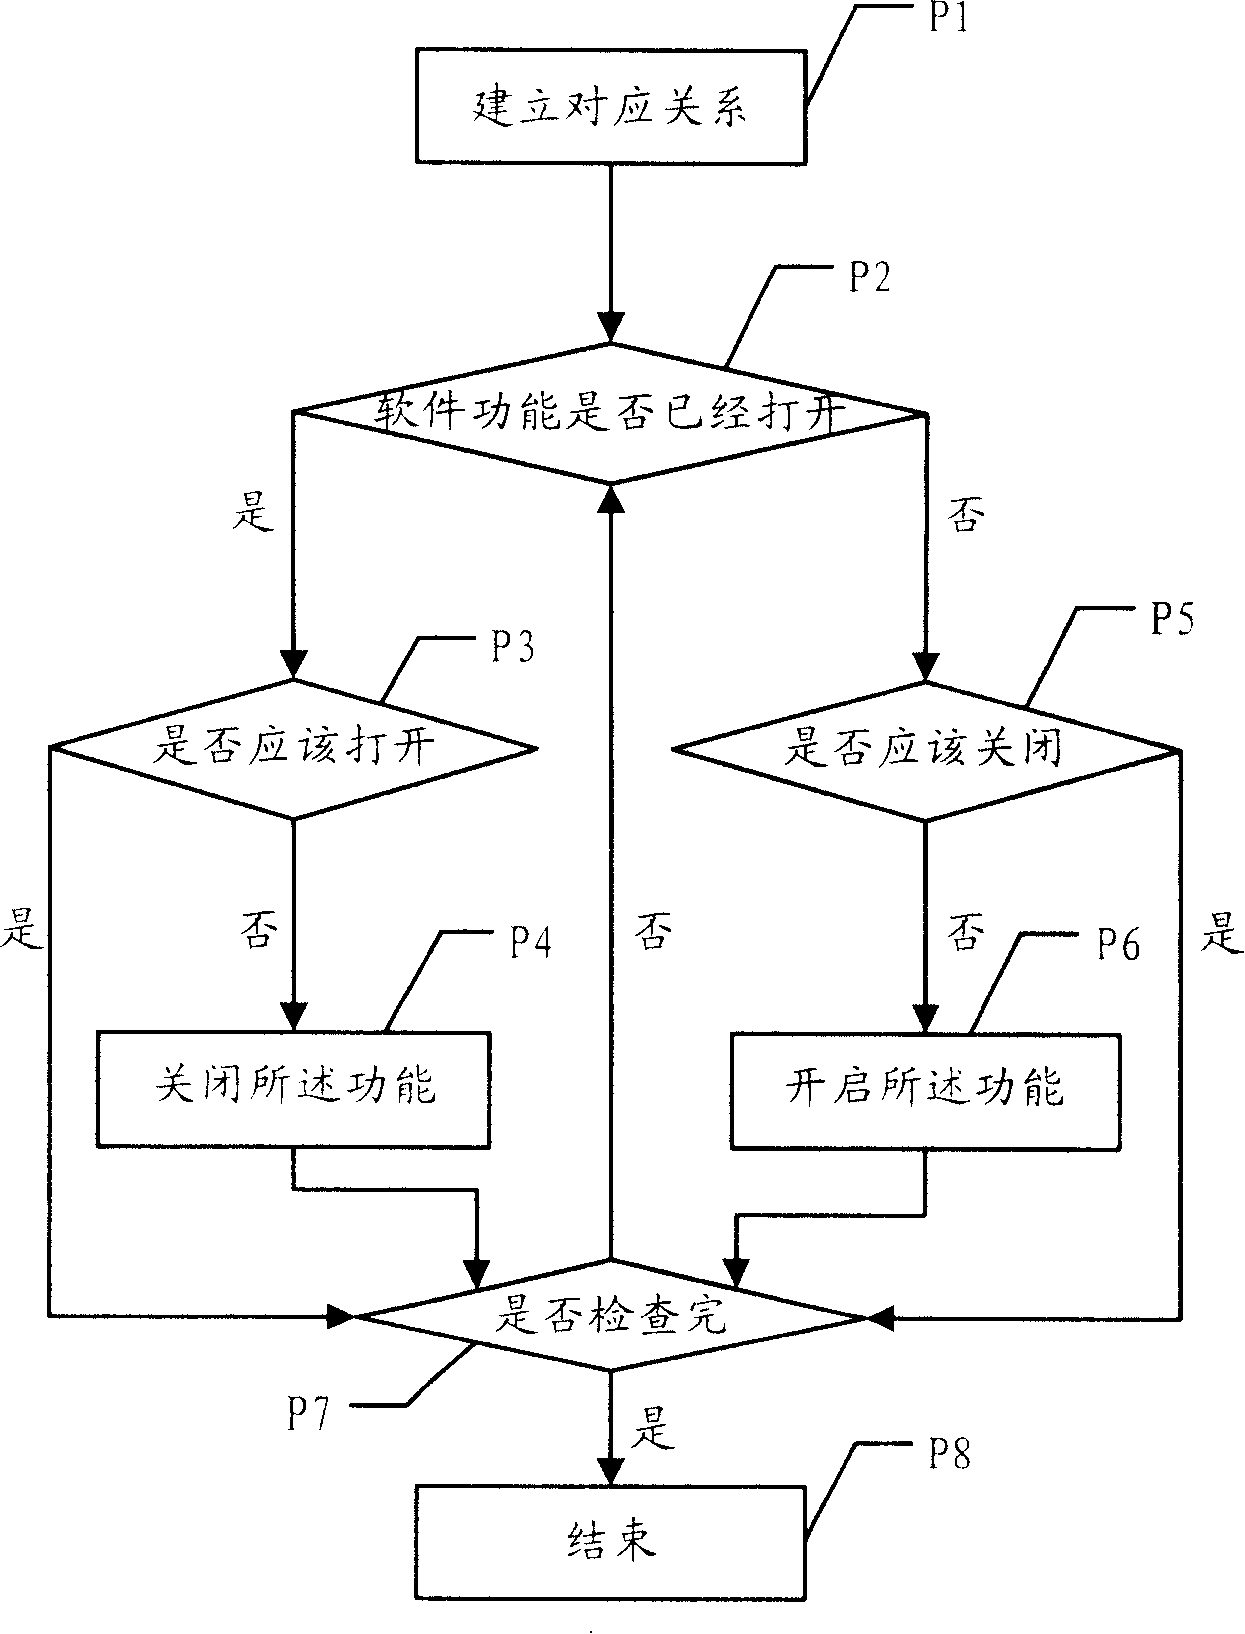 Method and system for controlling software function